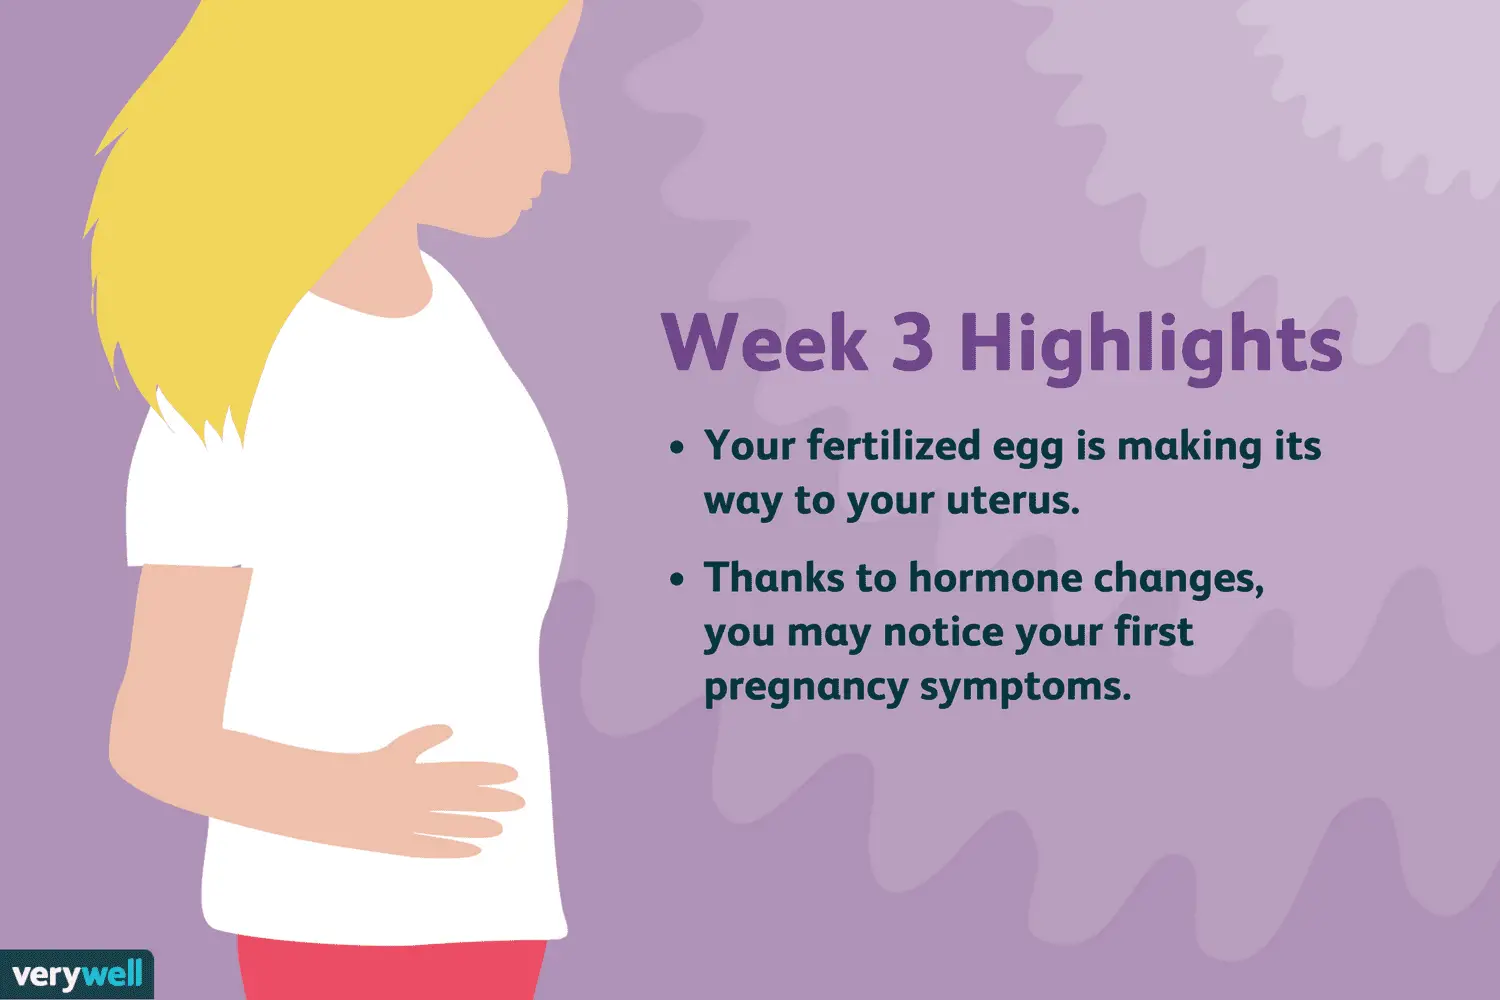 Can You Experience Pregnancy Symptoms After 1 Week